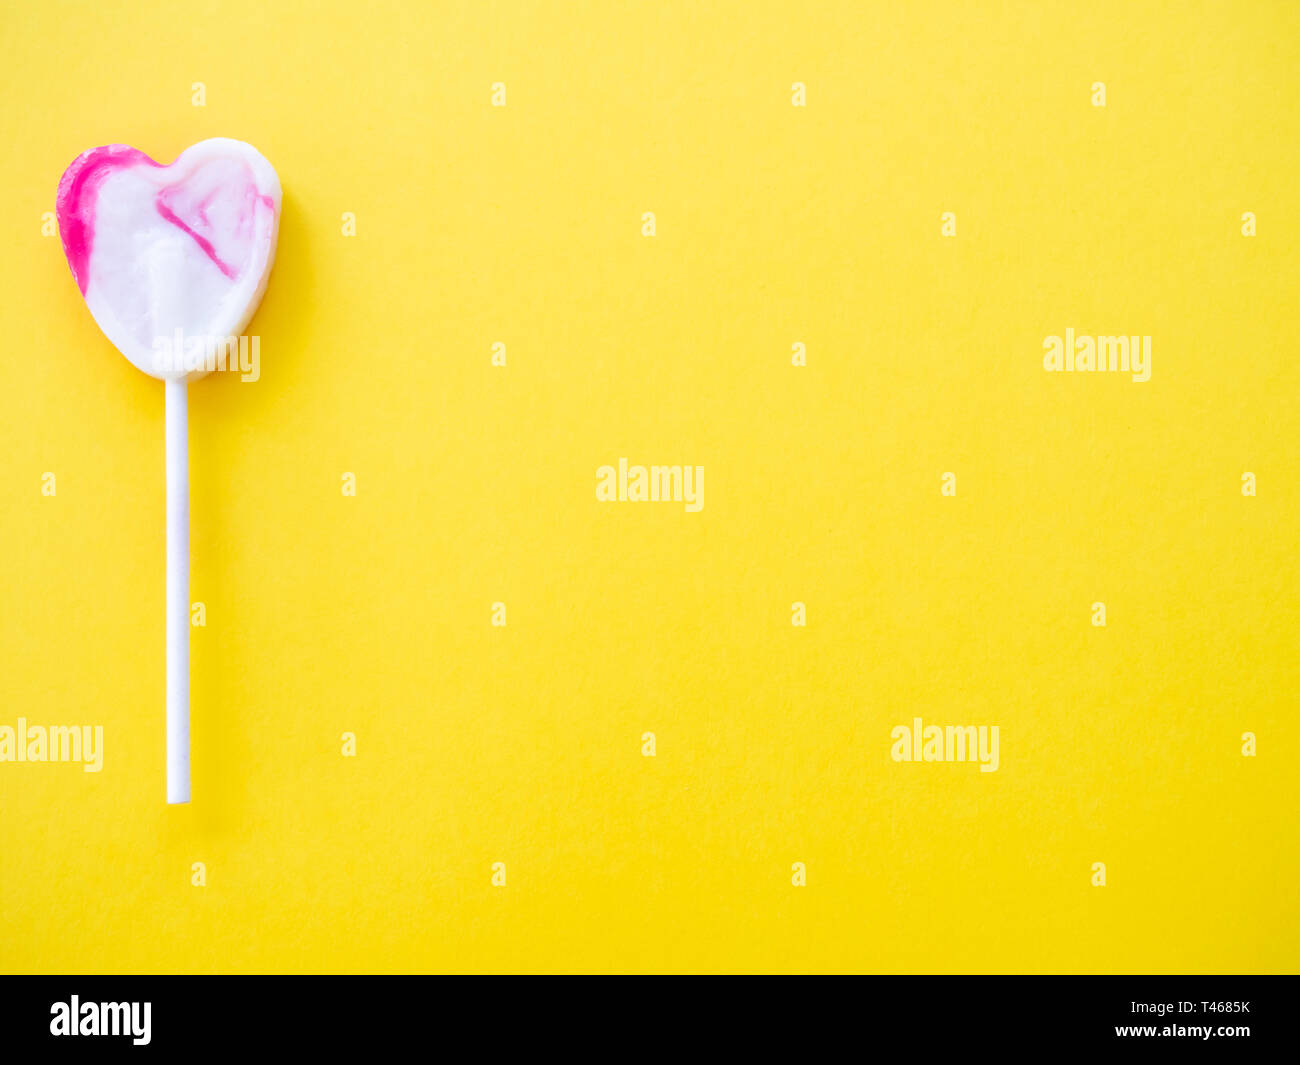 White and pink lollipop on a yellow background Stock Photo